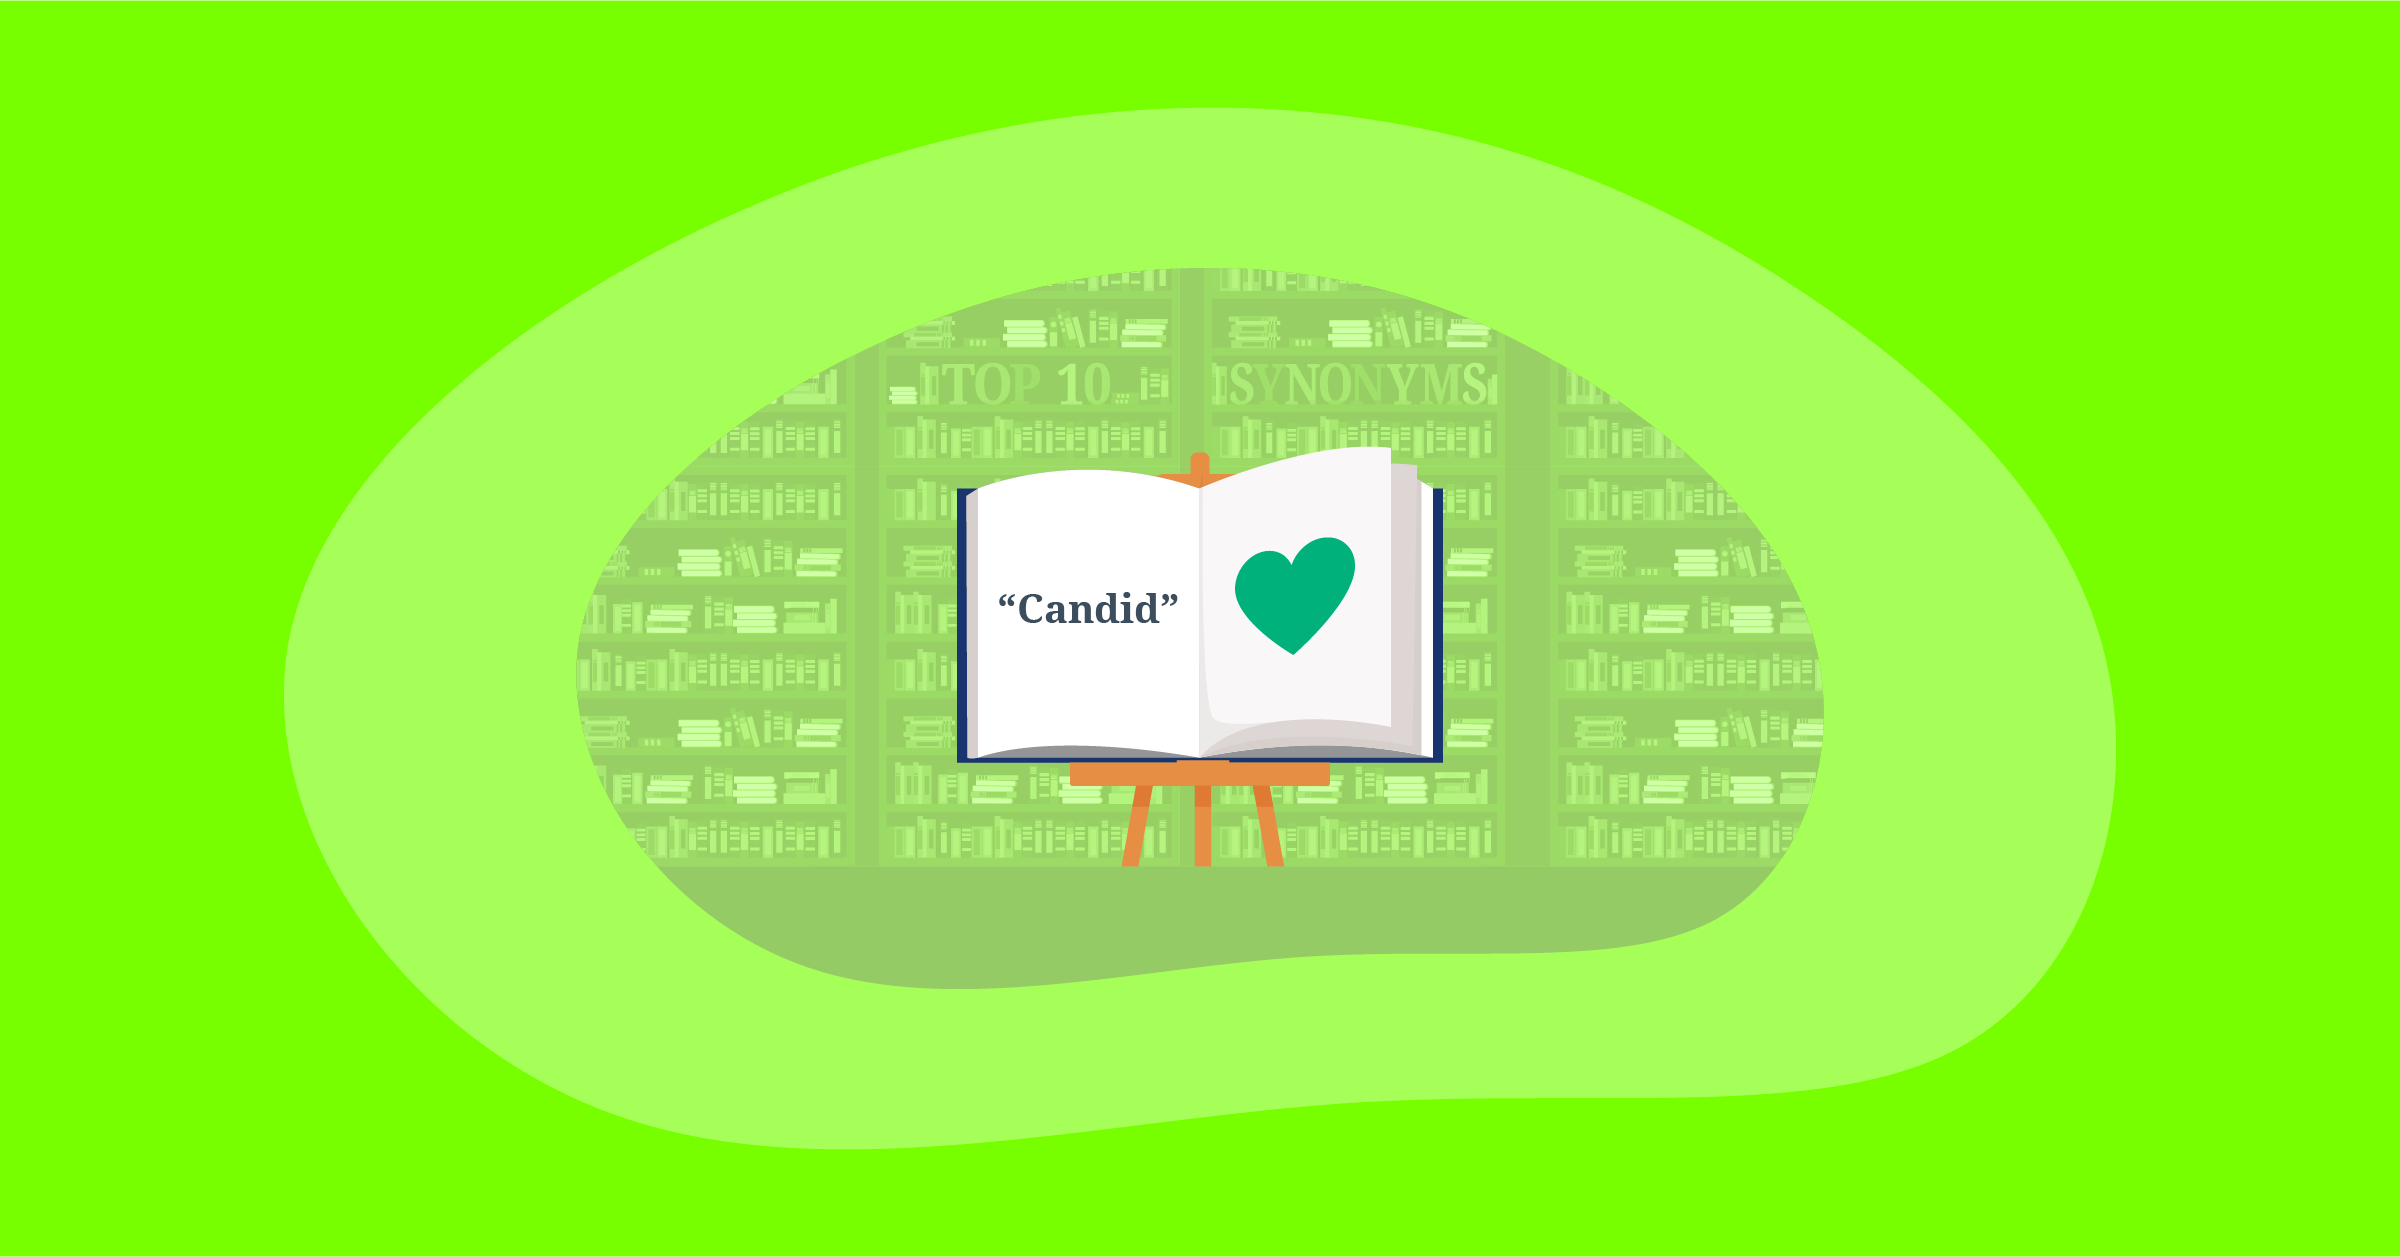 Illustration for Top 10 Positive & Impactful Synonyms for “Candid"